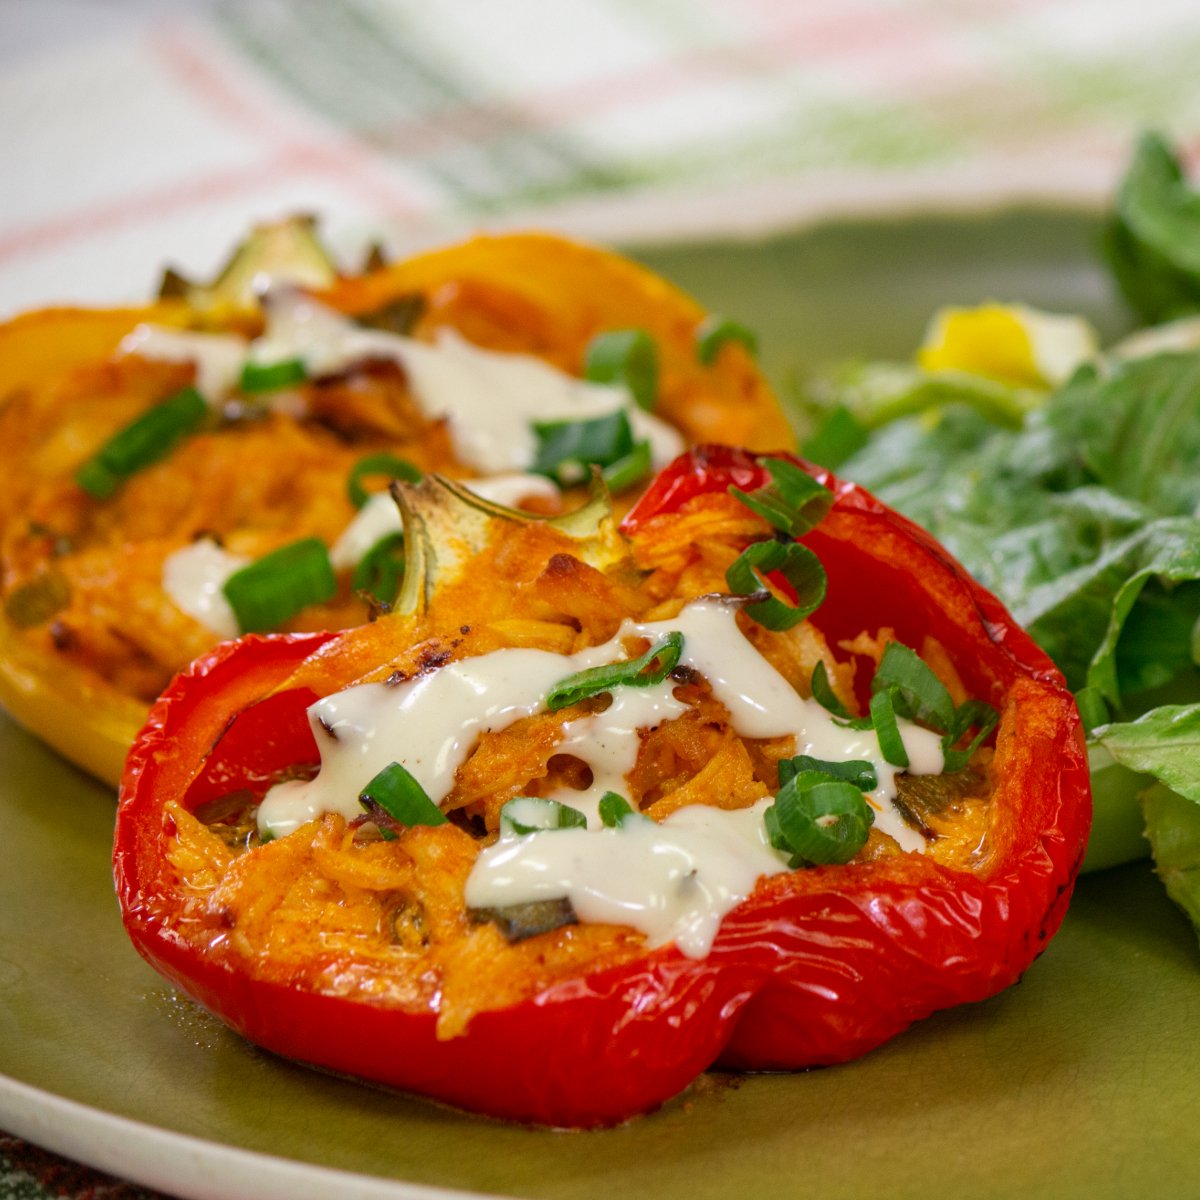 Spice things up with our buffalo chicken stuffed peppers recipe! Visit our blog to get the recipe and bring the heat to your table tonight.

#MidamarHalal #Halal #HalalRecipe #StuffedPeppers